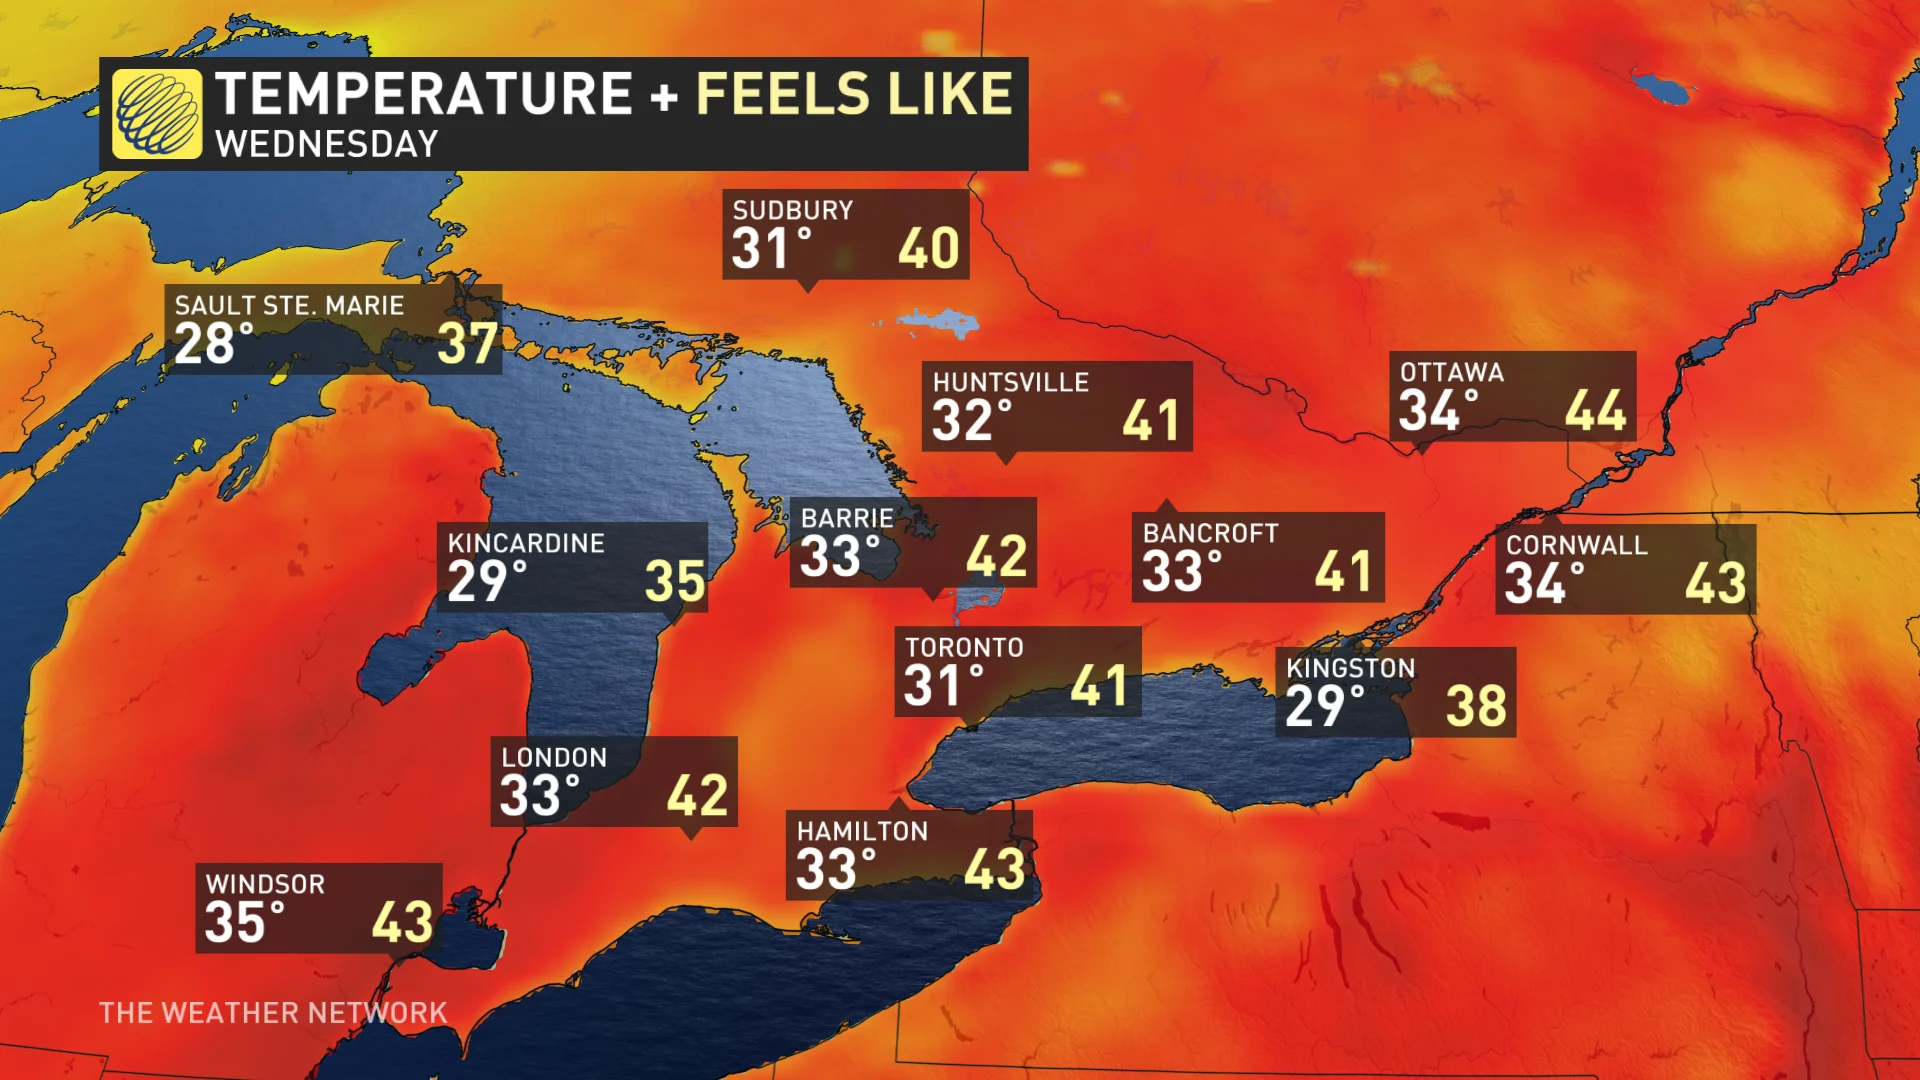 Ontario and Quebec Thursday temperatures and feels-like values_June 17